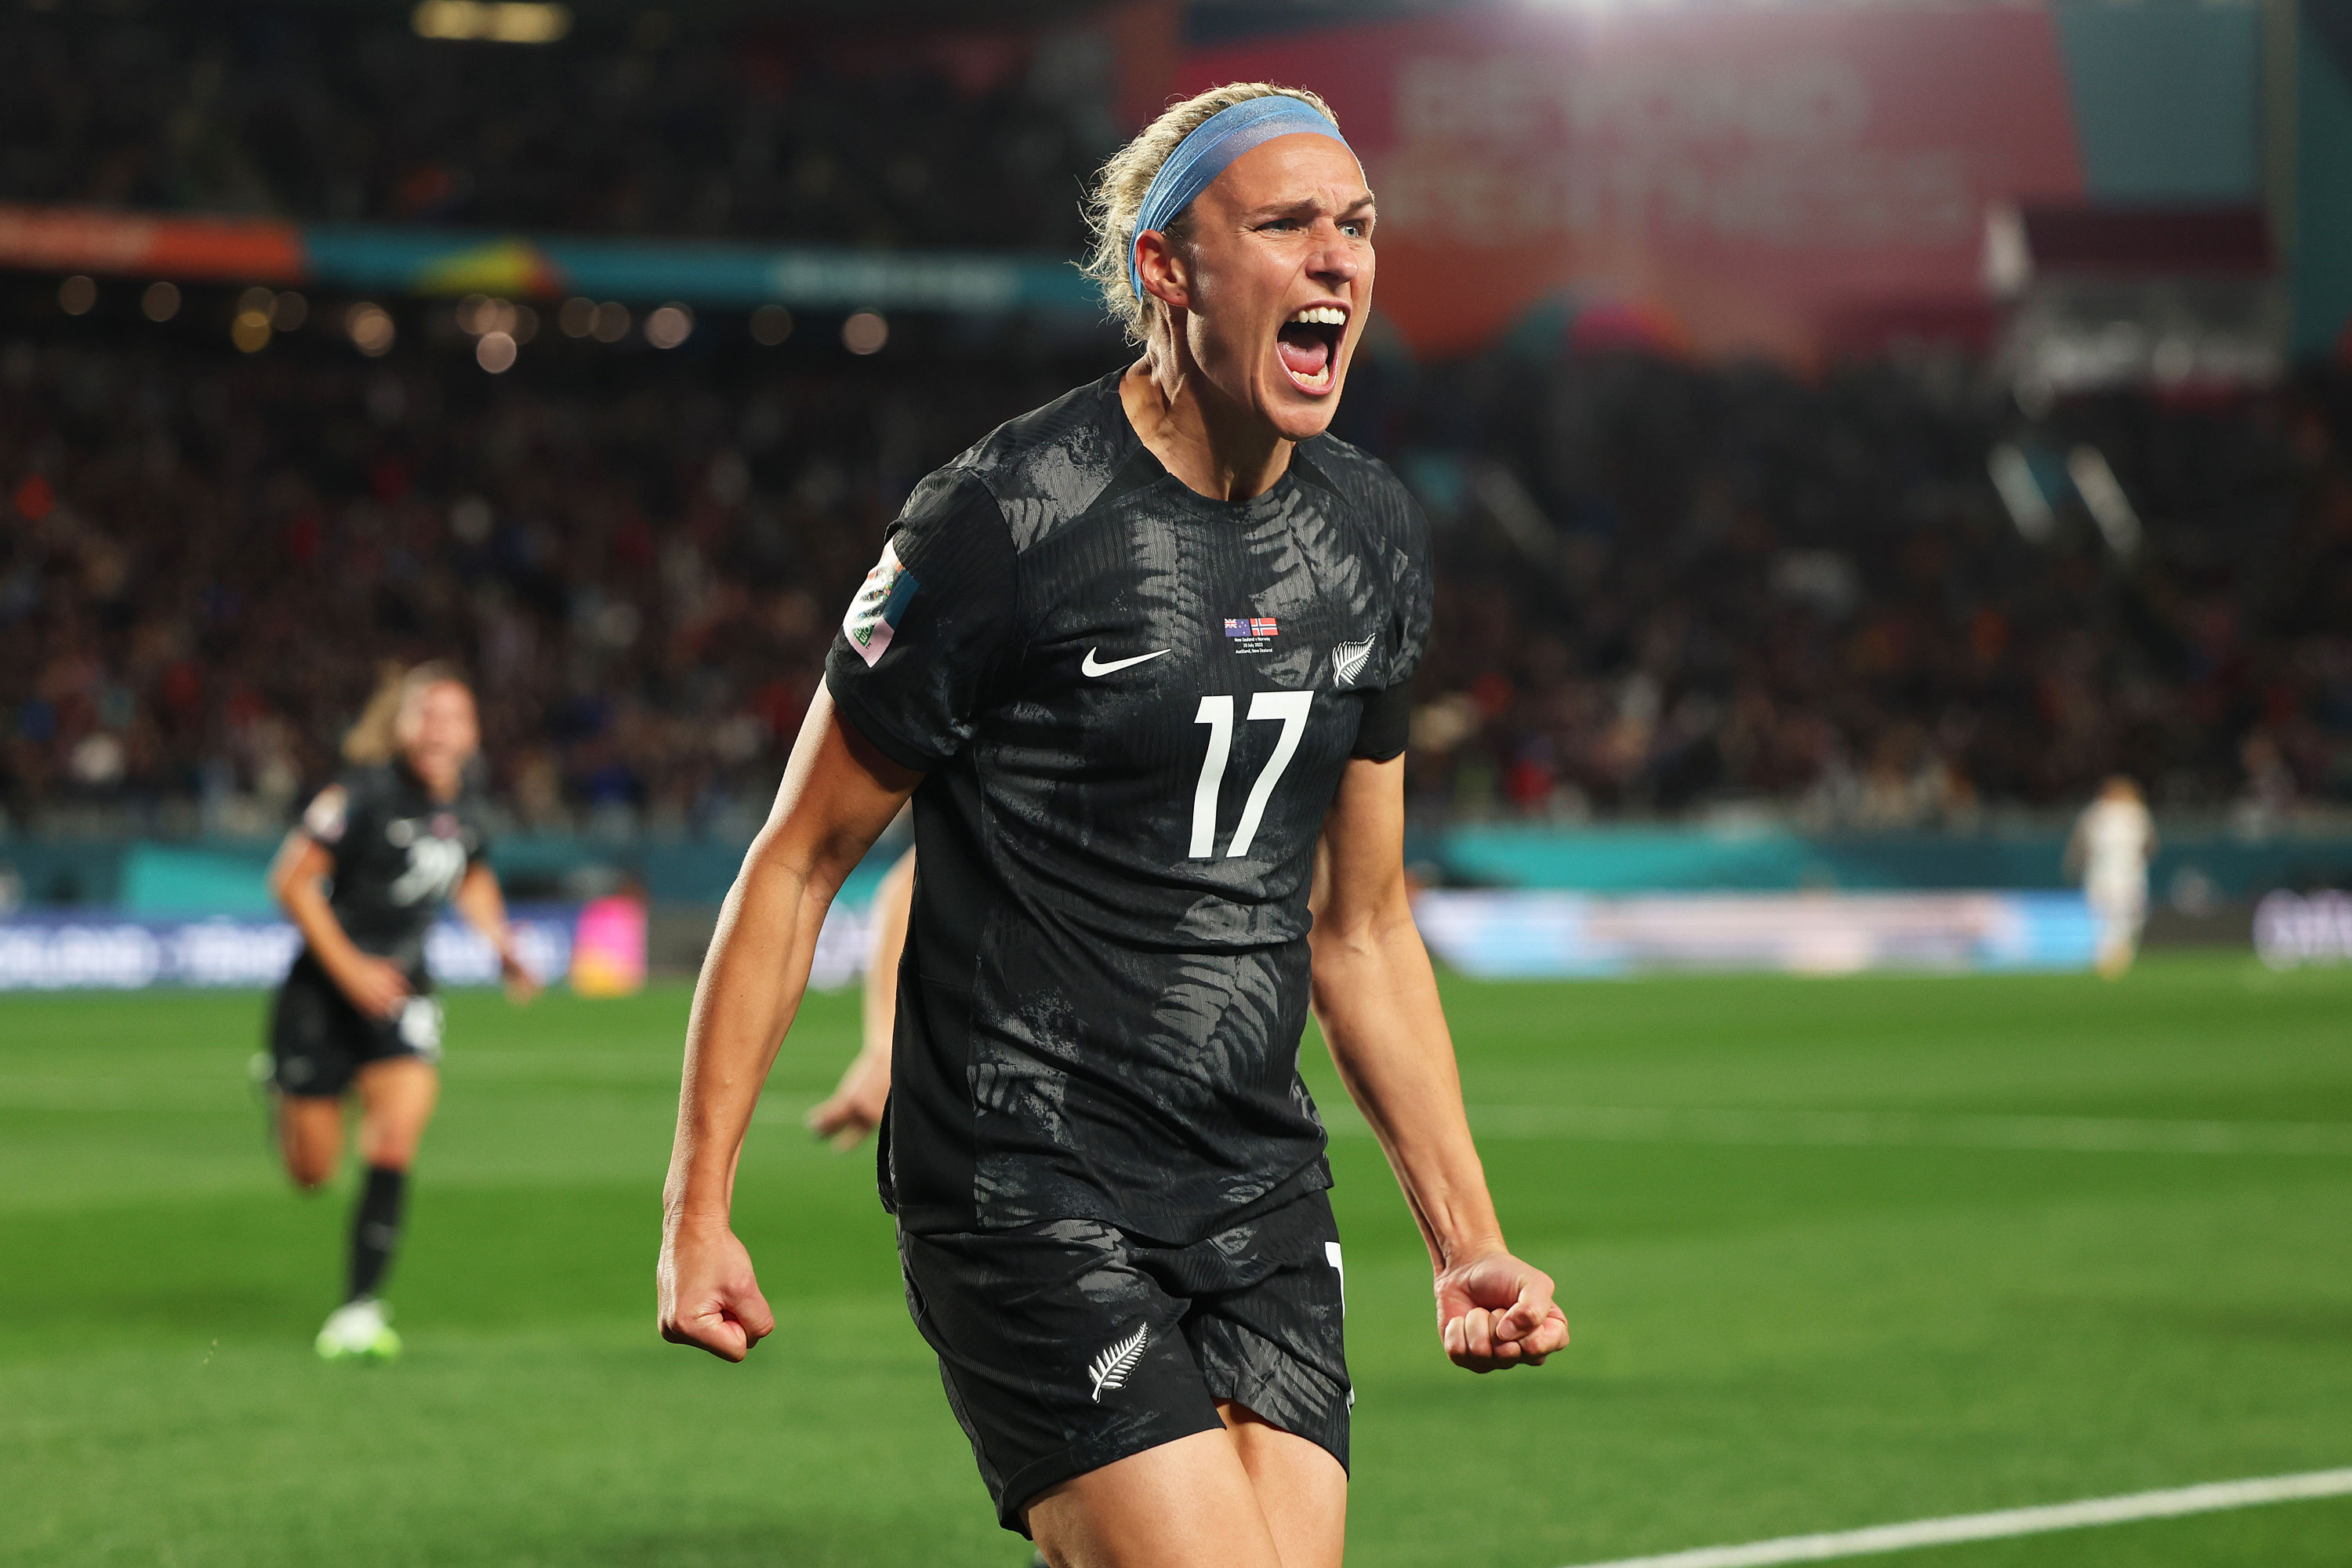 Hannah Wilkinson of New Zealand celebrates after scoring her team's first goal on July 20.